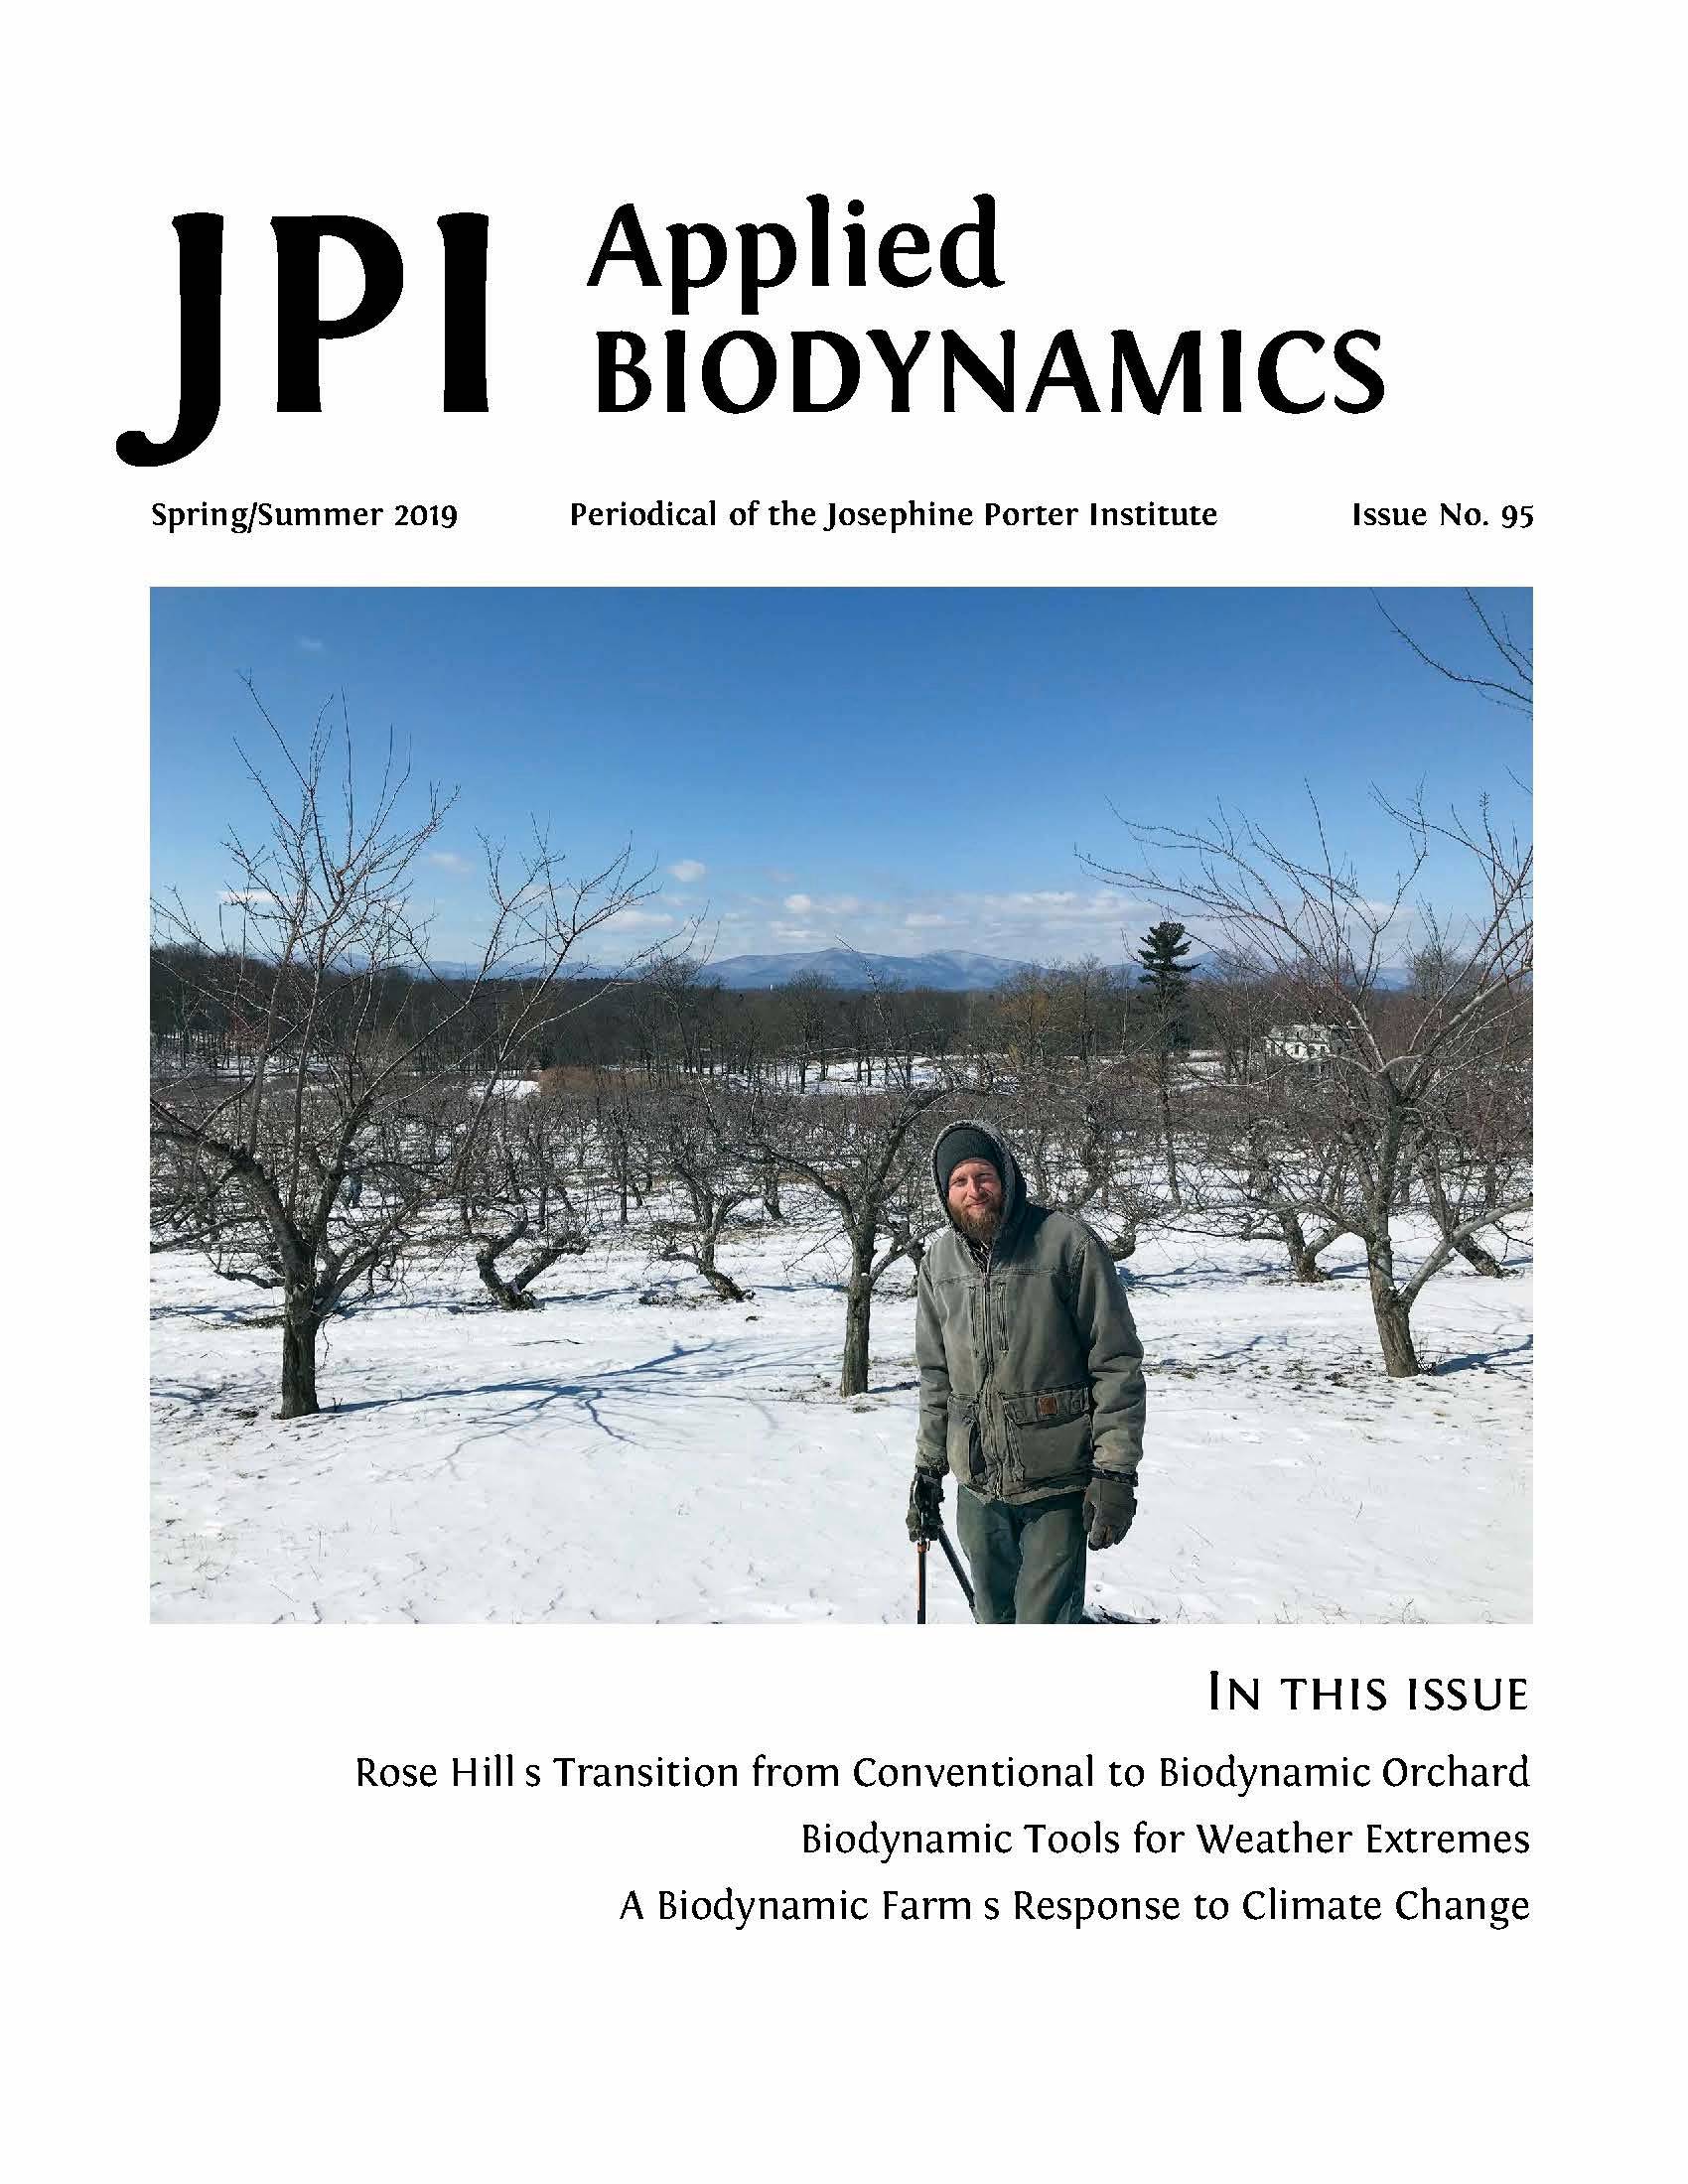 "Applied Biodynamics" Back Issues 51-100 - The Josephine Porter Institute